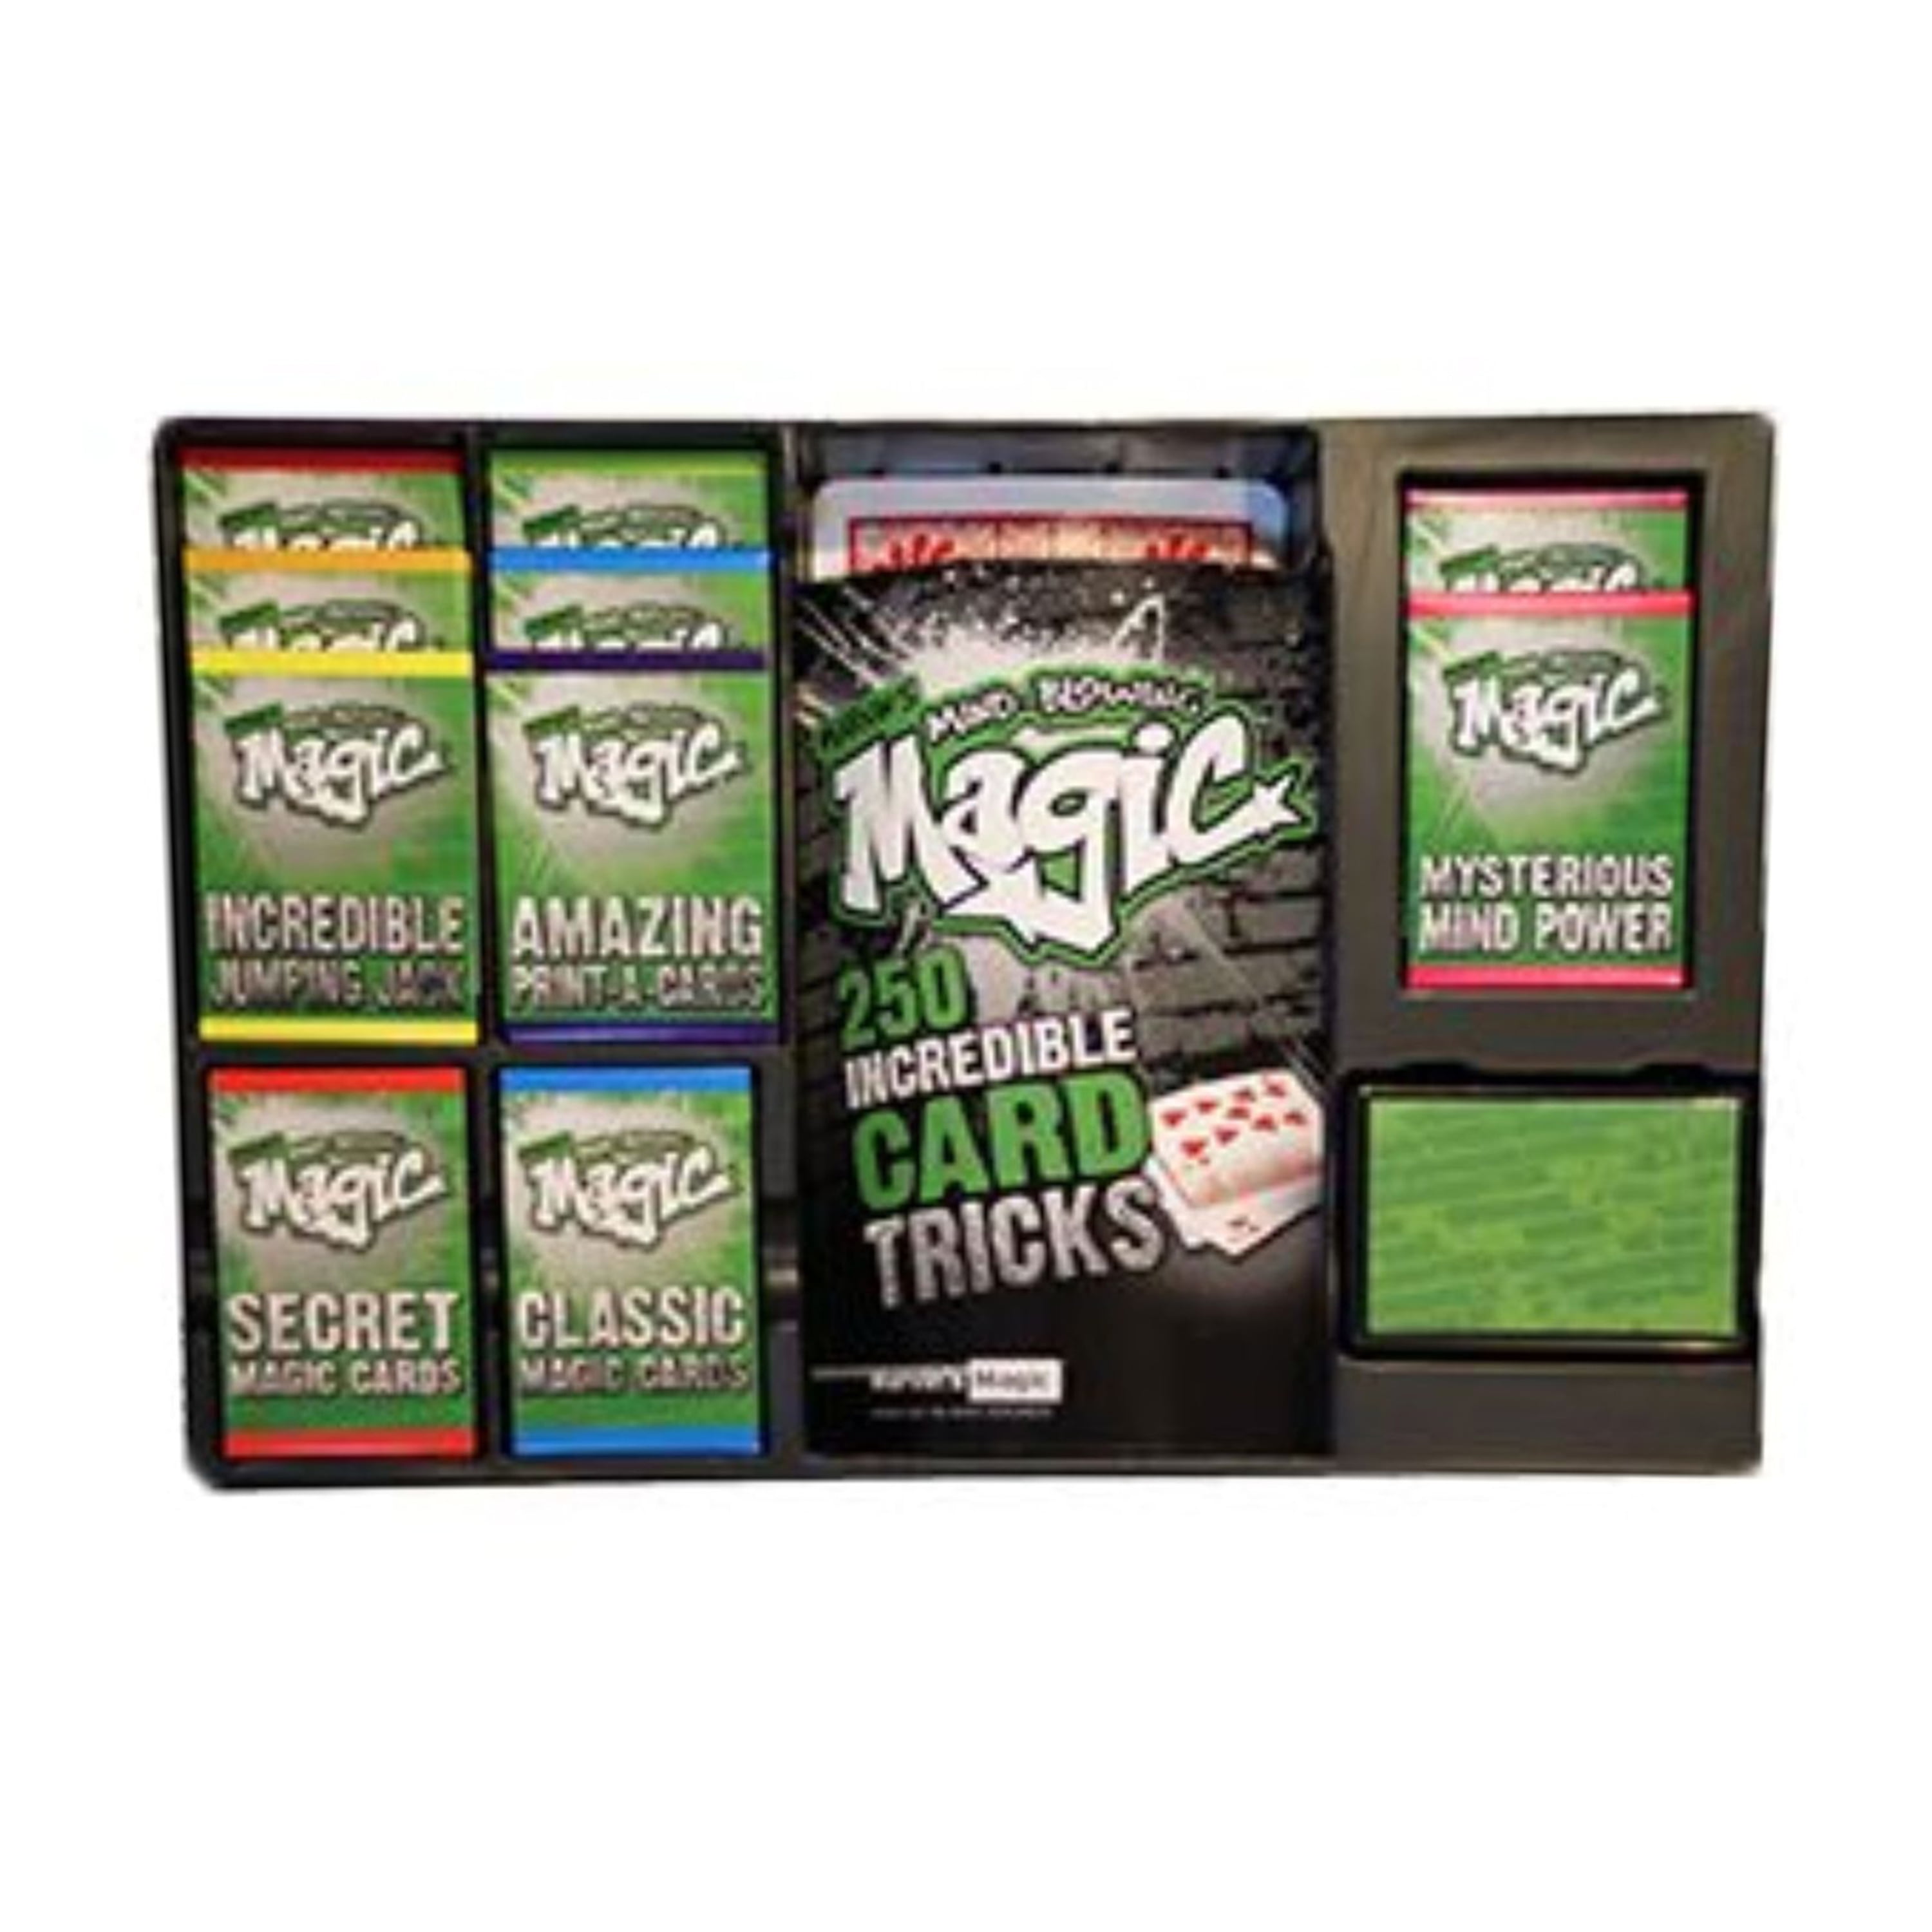 6 INCREDIBLE CARD TRICKS FOR SALE £4.00 EACH PACK MARVIN'S MIND BLOWING TRICKS 